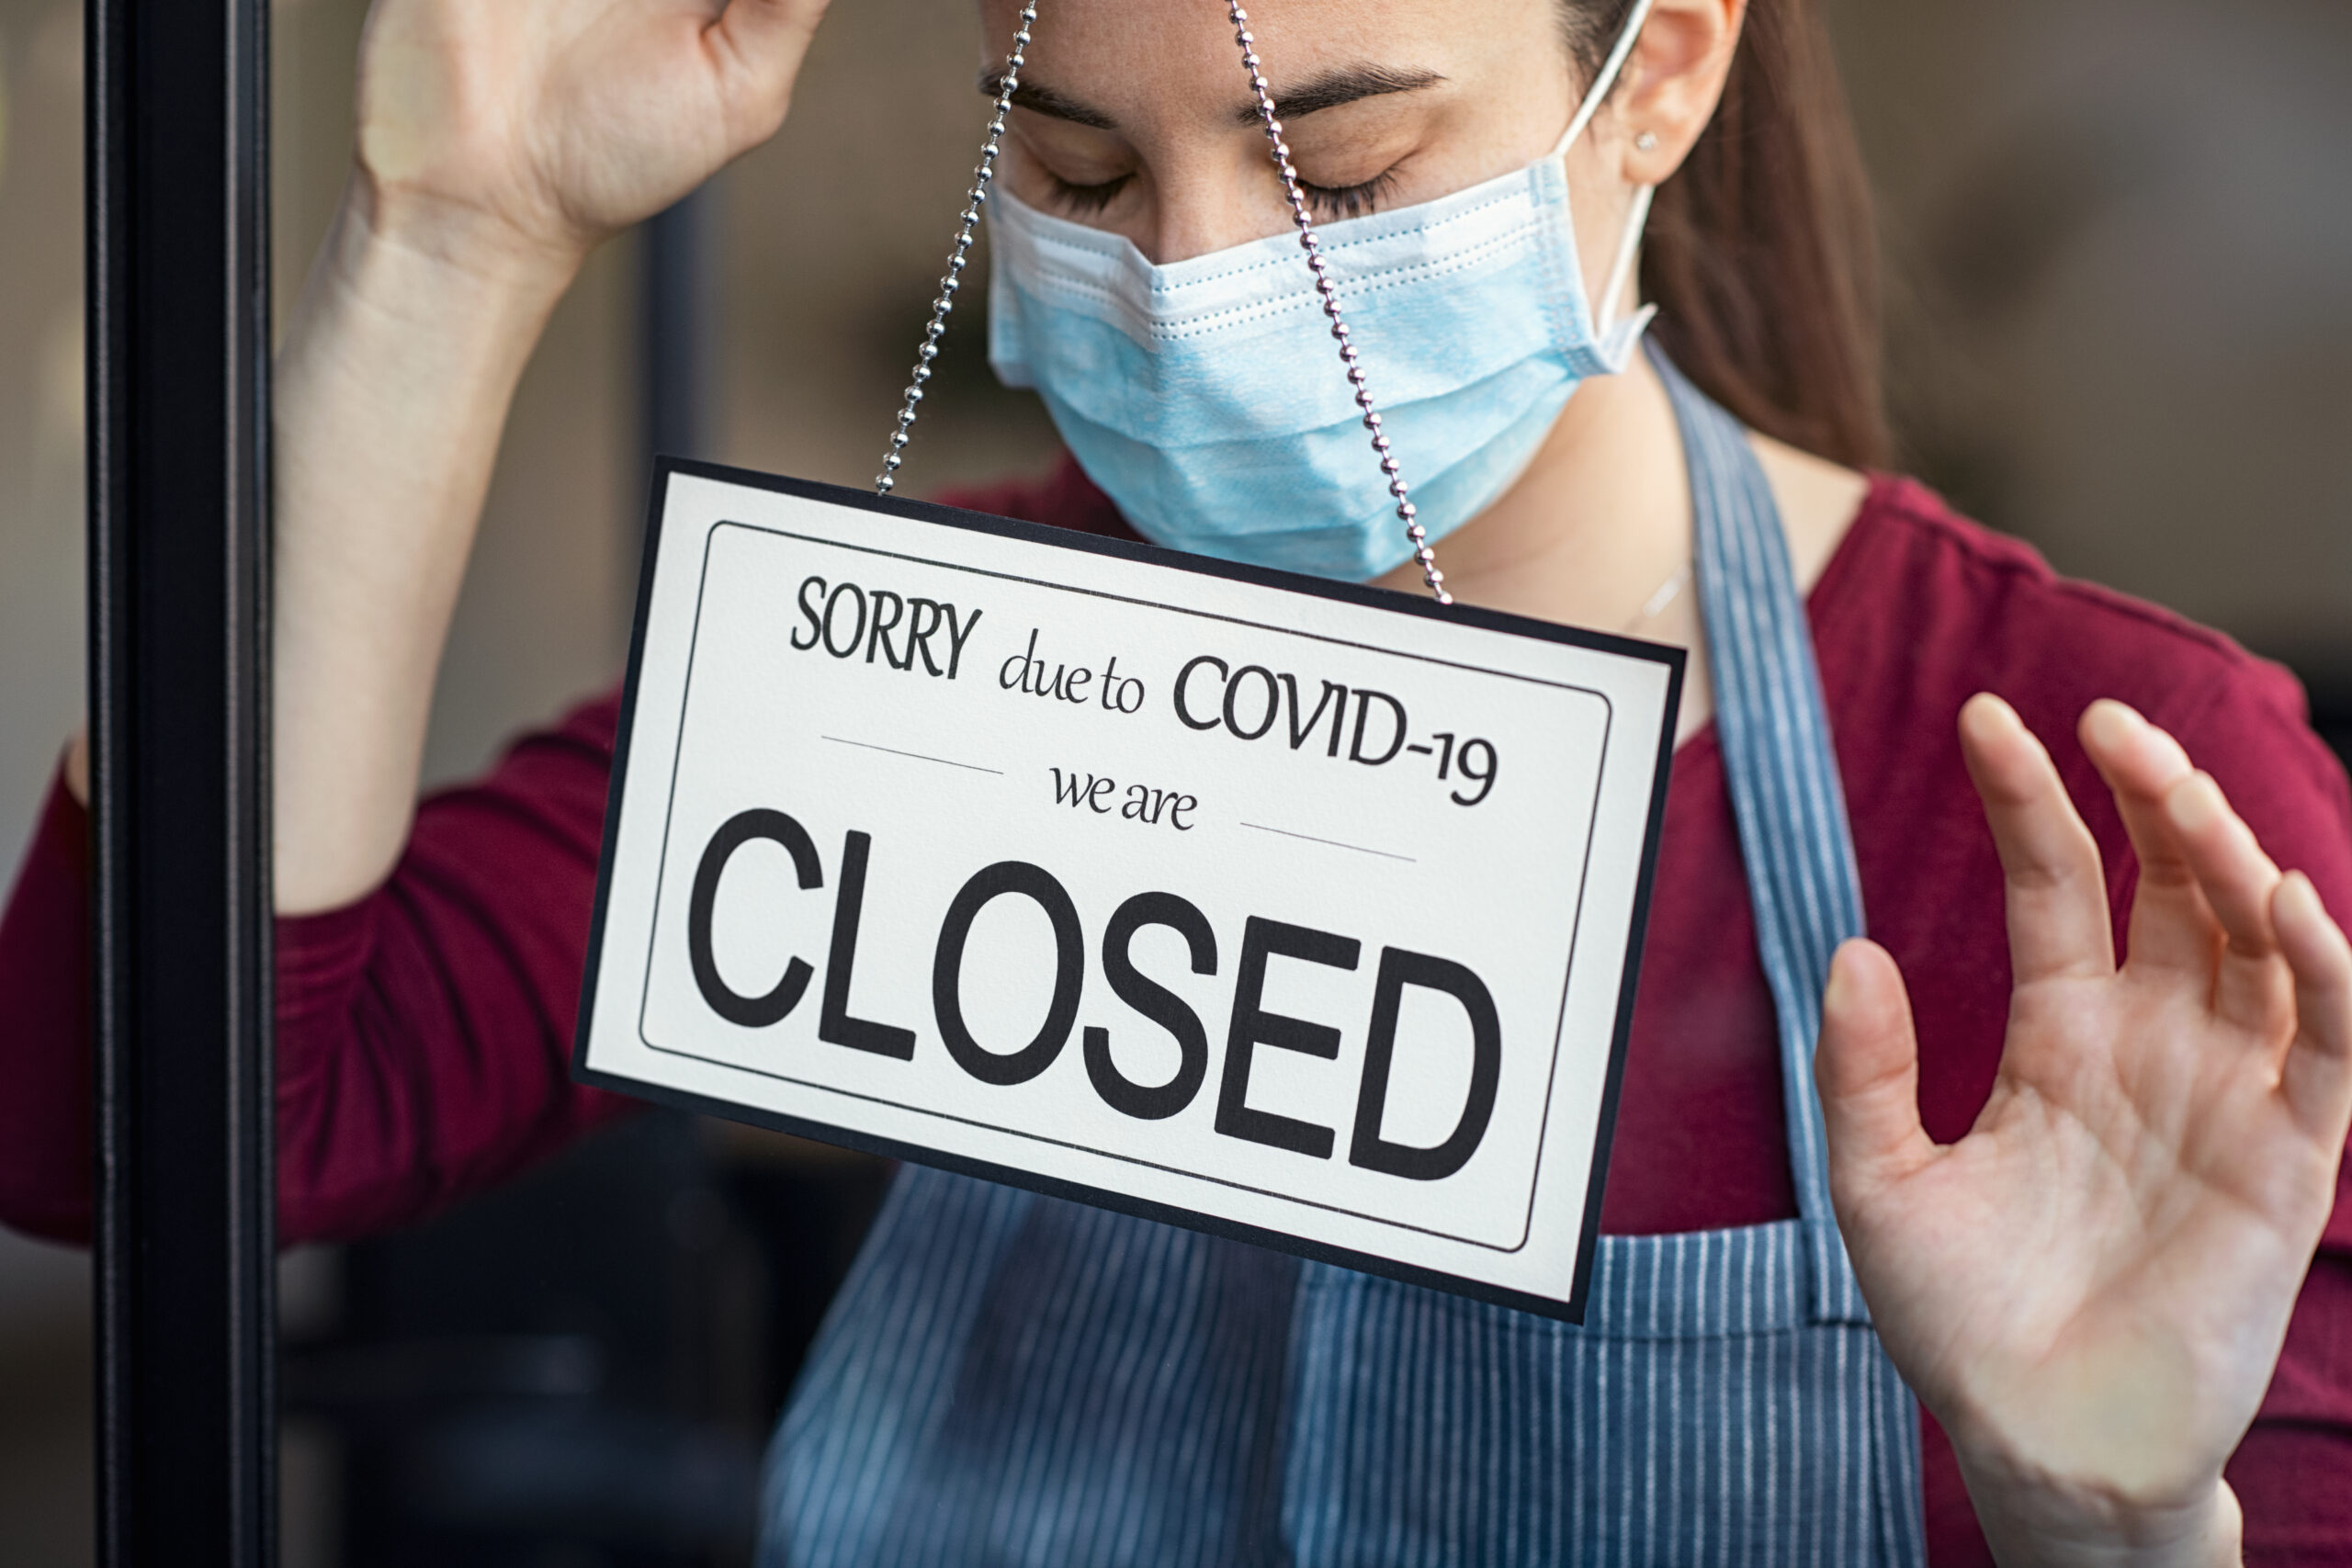 A business woman is wearing a covid 19 mask to protec her self from contamination of Covid -19. She is sad and stressed due to business closing.